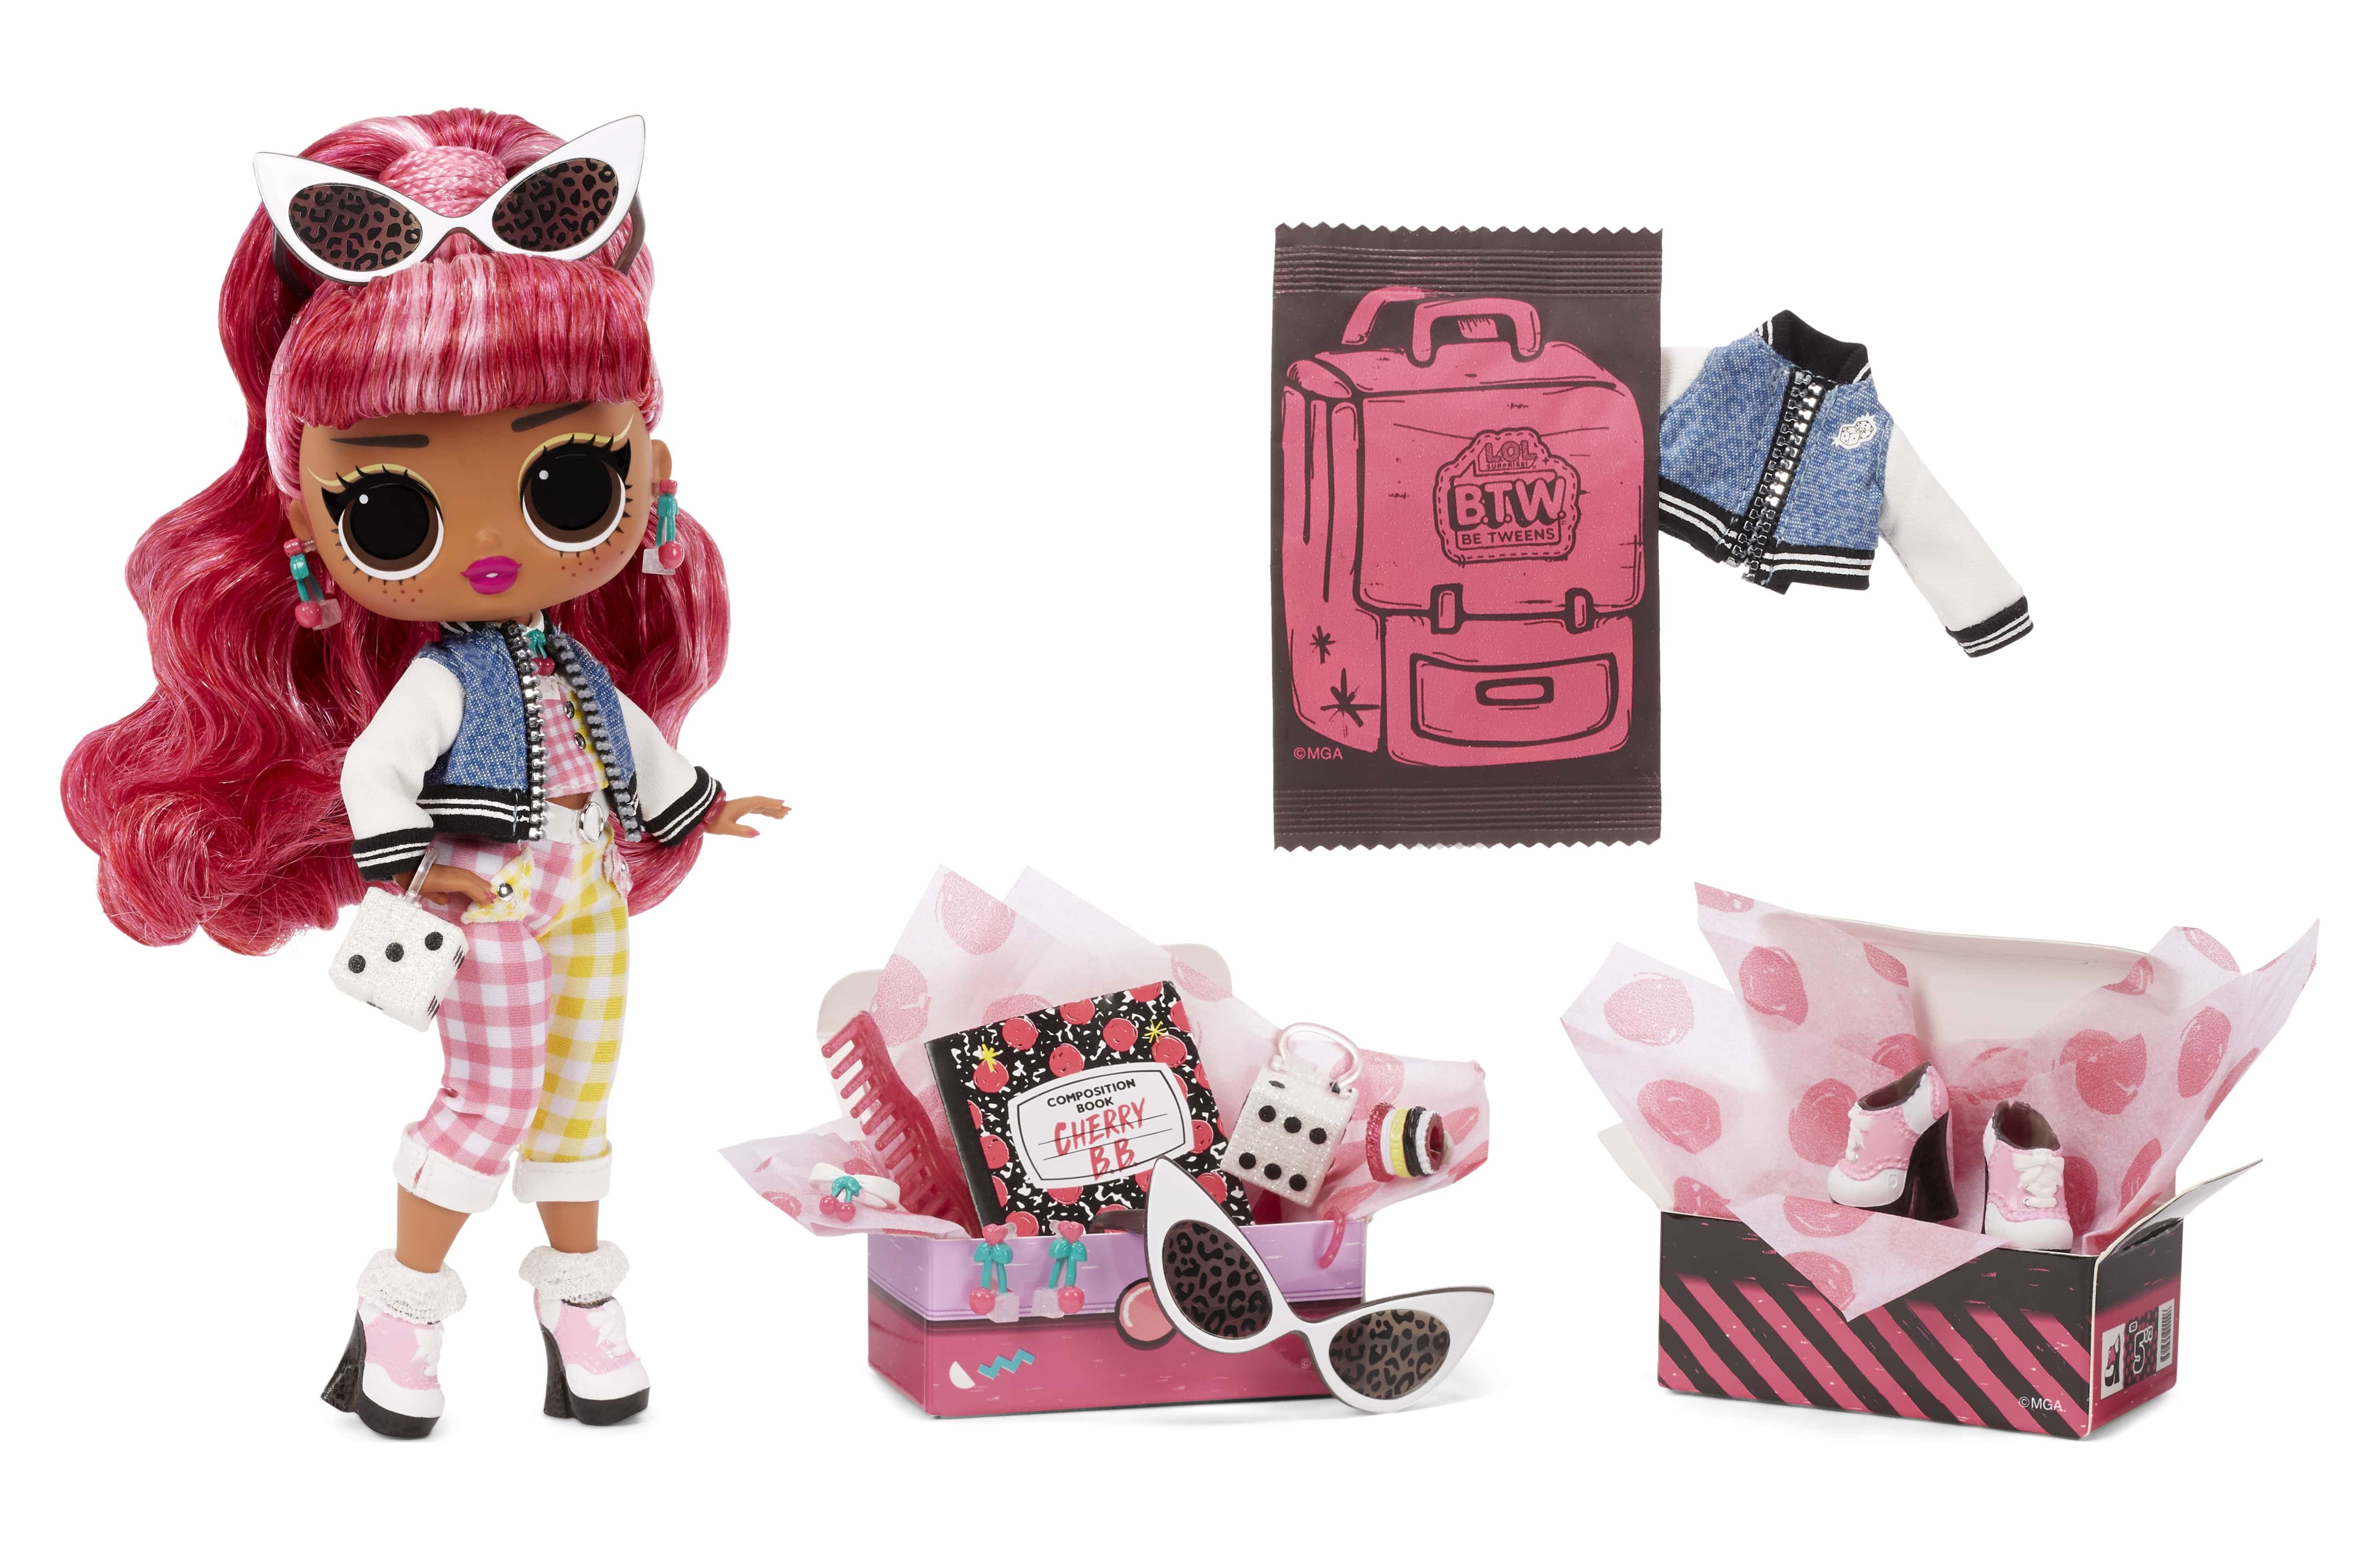 LOL Surprise Tweens Fashion Doll Cherry BB With 15 Surprises, Great Gift for Kids Ages 4 5 6+ - image 3 of 8